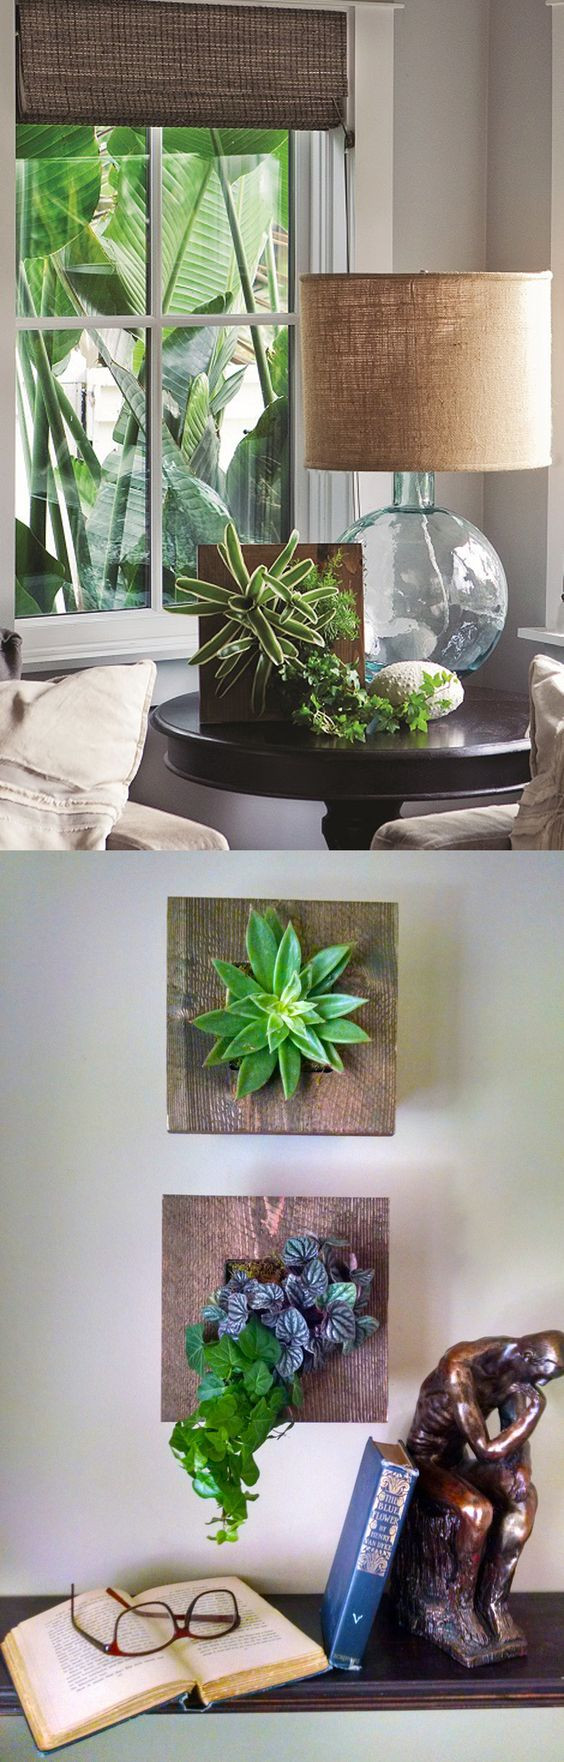 Living Wall Planters Indoor
 Living wall planter Wall planters and Living walls on